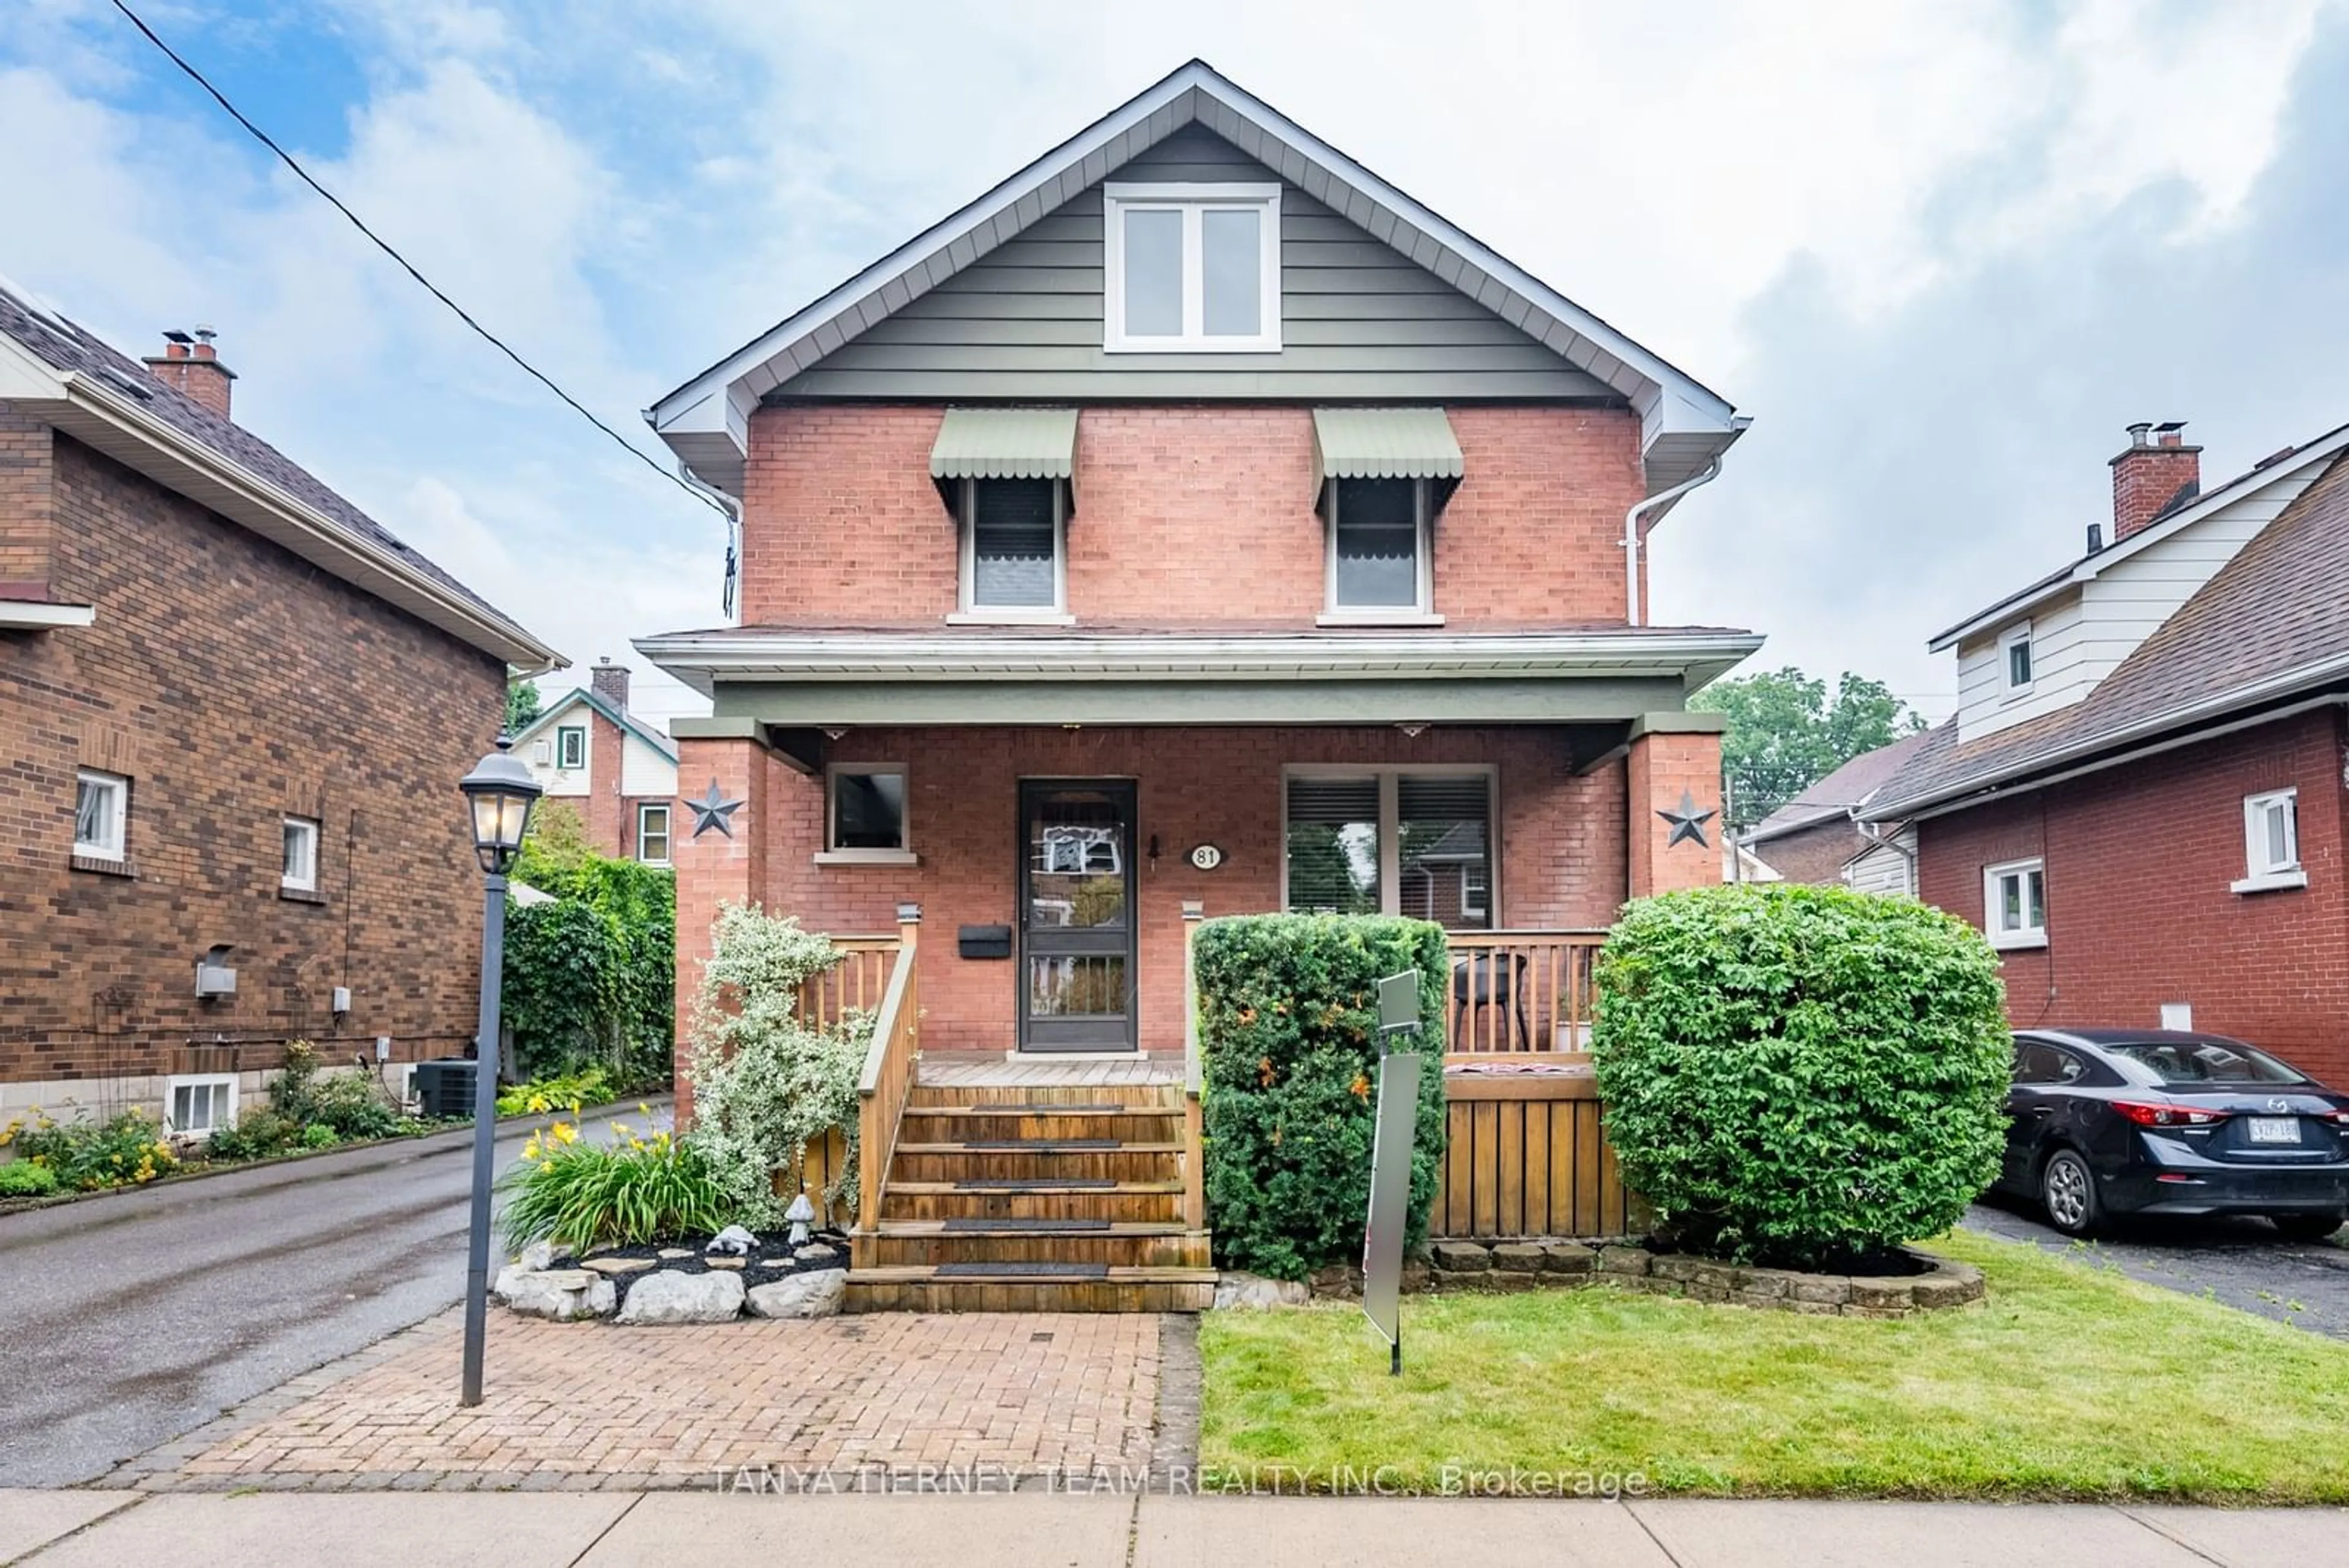 Home with brick exterior material for 81 Rowe St, Oshawa Ontario L1H 5P7